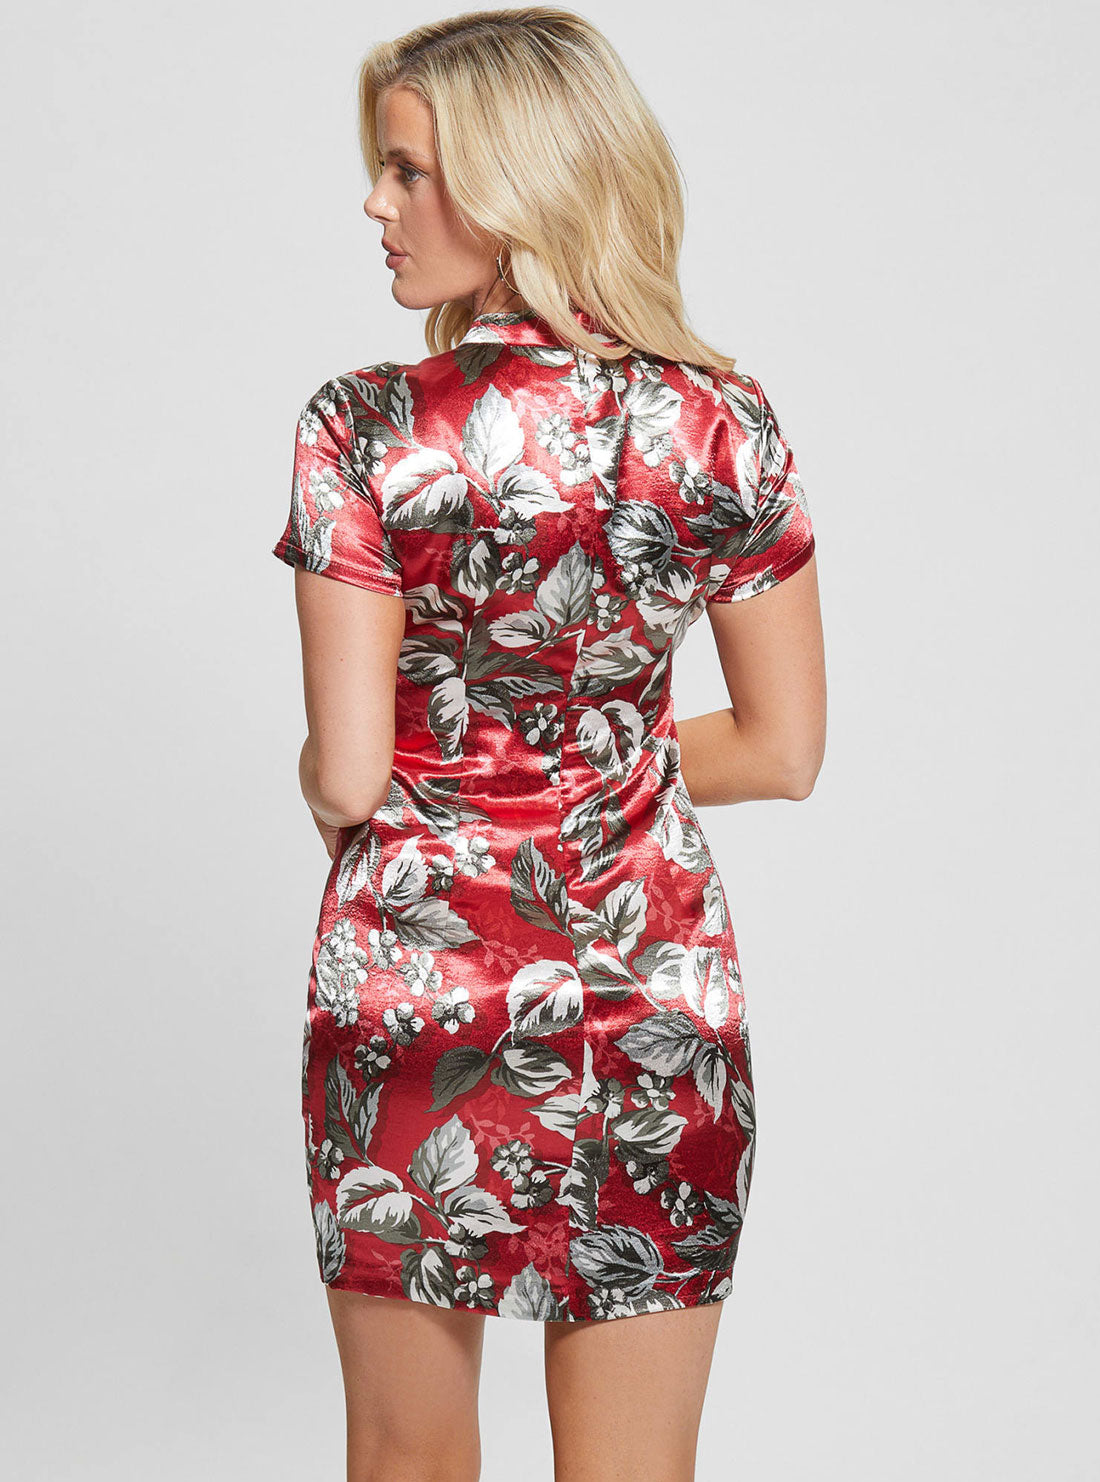 Red Floral Sandra Satin Dress | GUESS Women's Apparel | back view